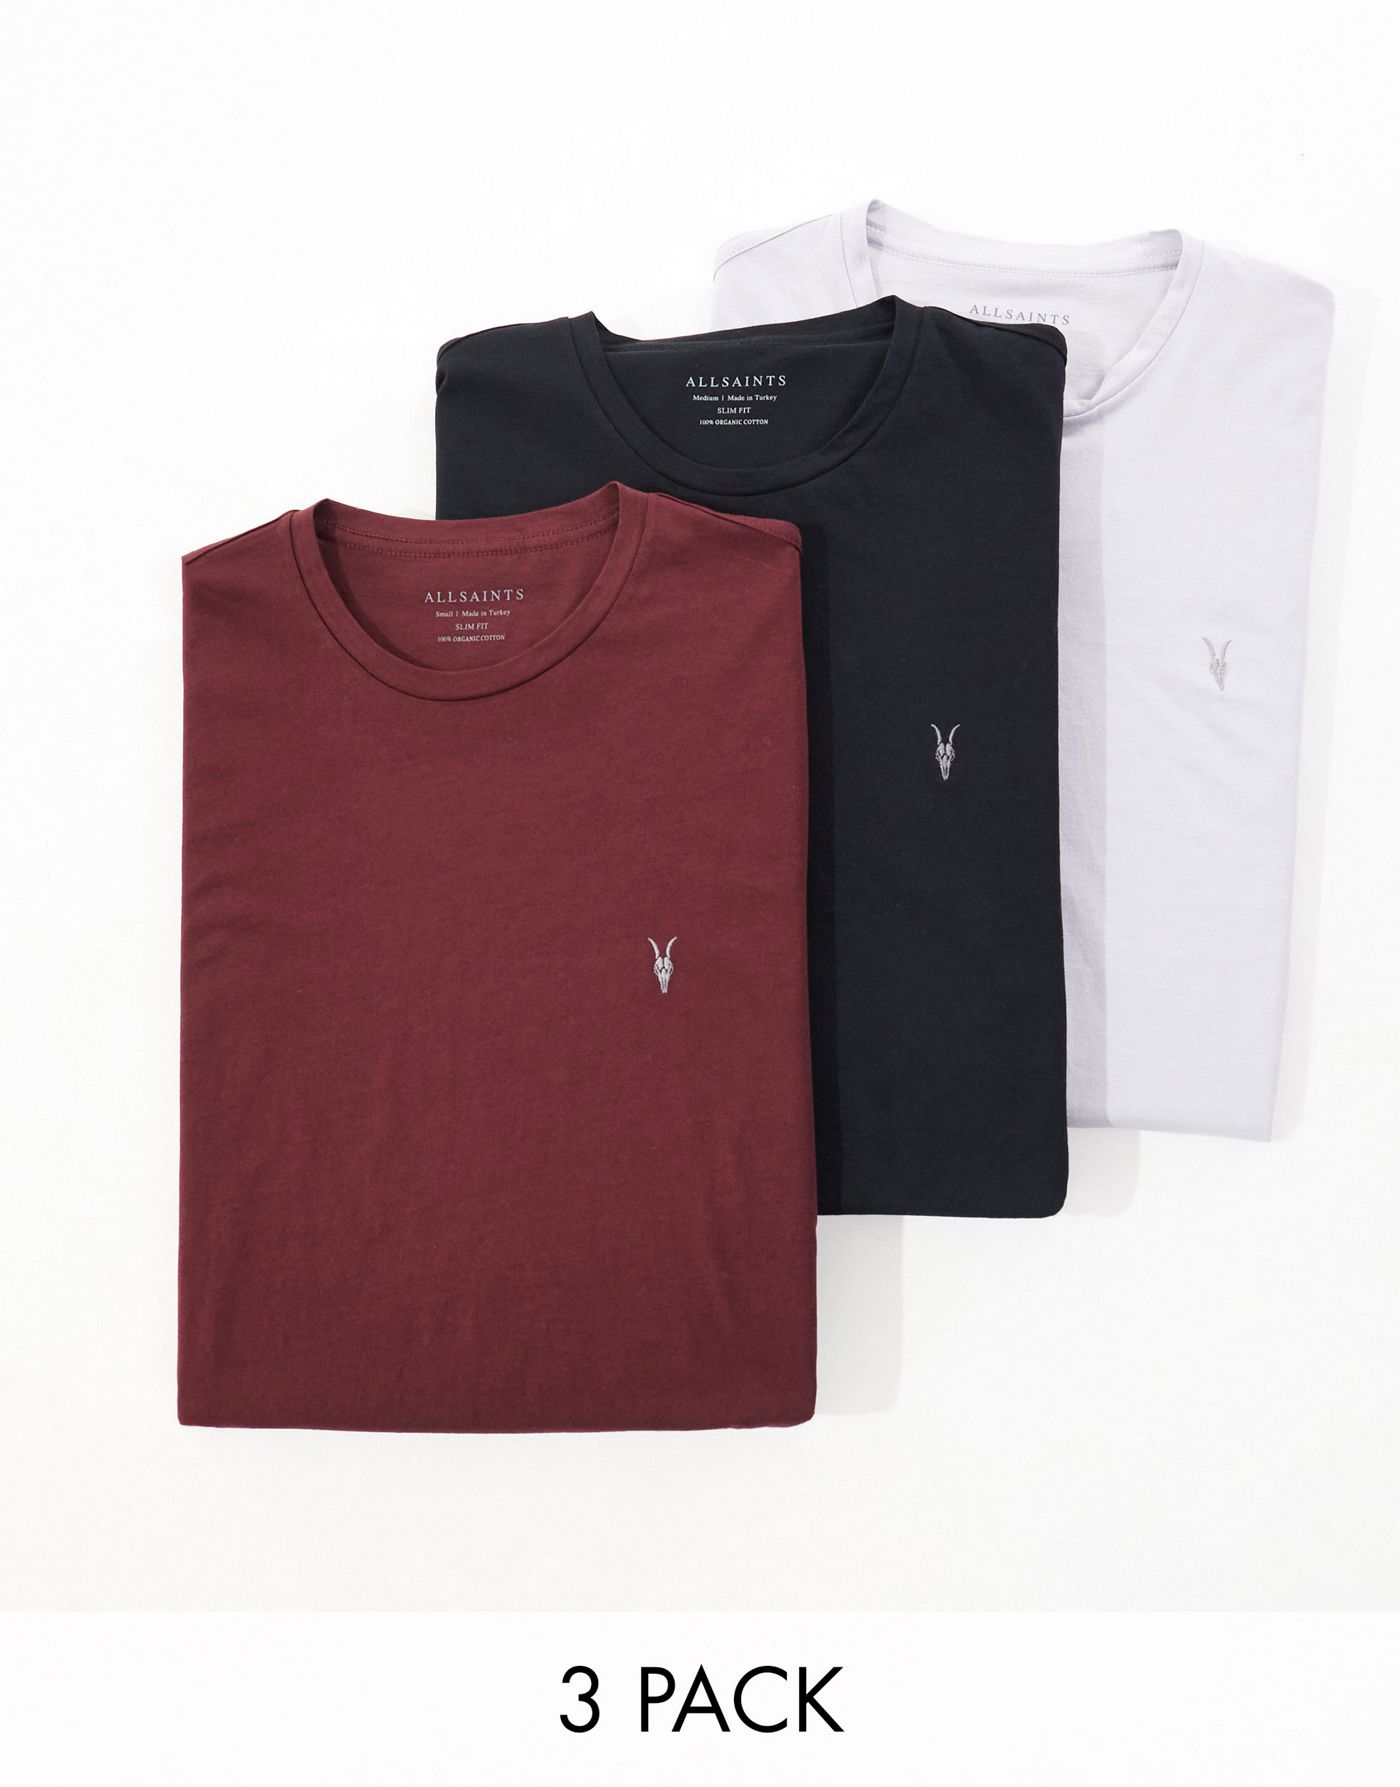 AllSaints Tonic 3 pack crew t-shirts in red, grey and black